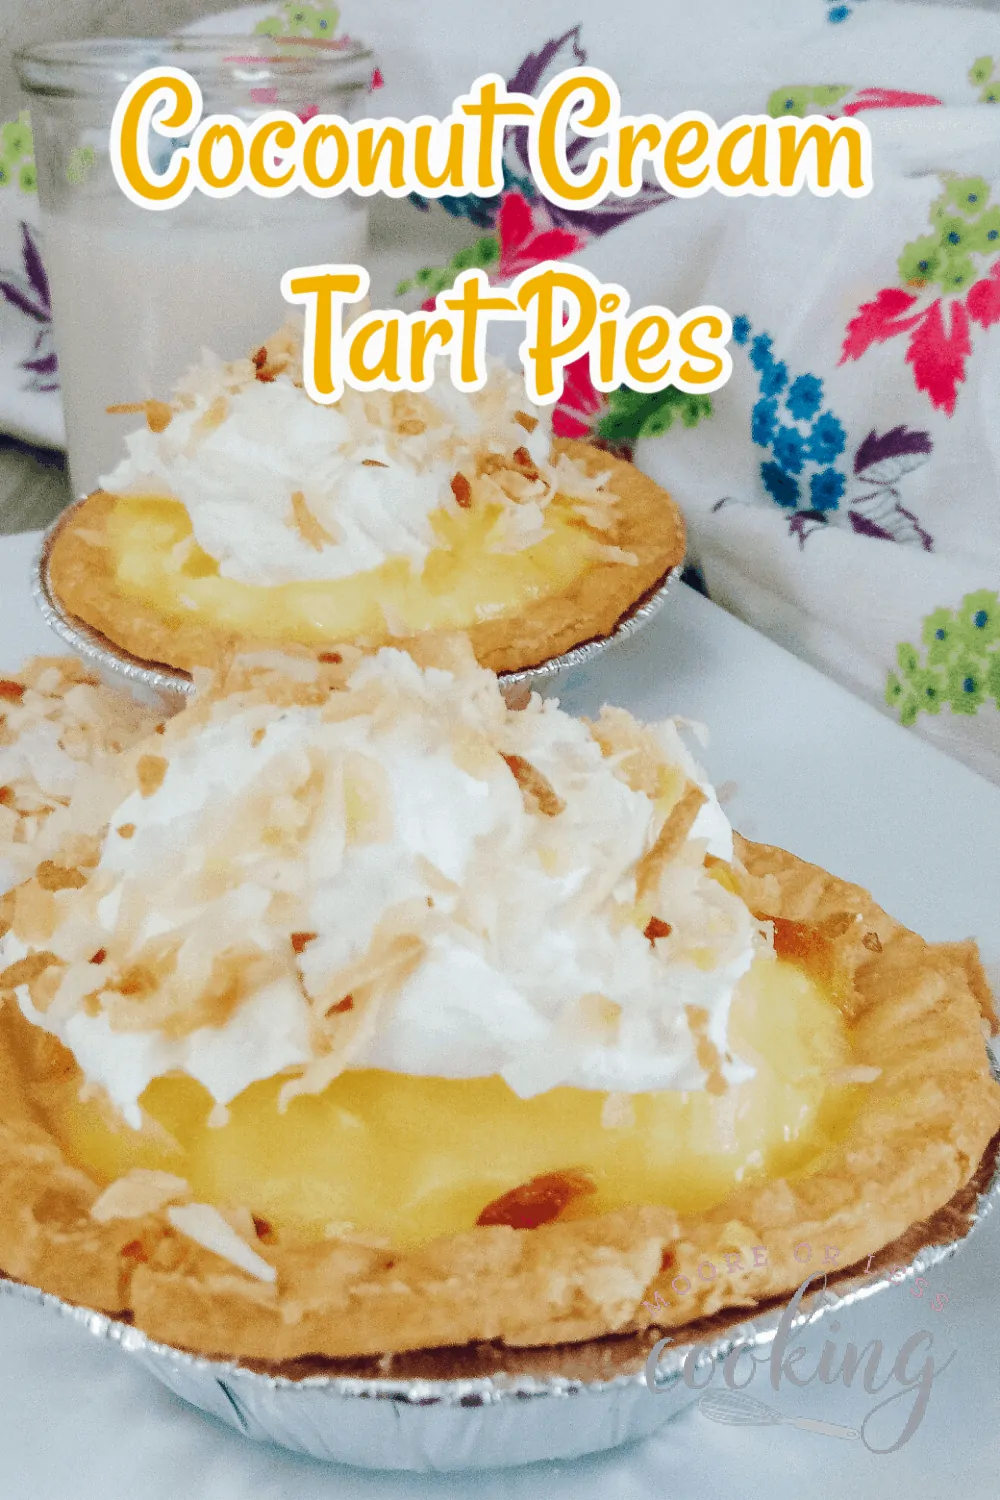 These no-bake mini tarts are a quick, easy and creamy coconut dessert that’s topped with the nutty flavor of toasted coconut. Perfect for a brunch, a party, or a single-serve treat, these coconut cream pie tarts are a delightfully simple and scrumptious dessert. via @Mooreorlesscook